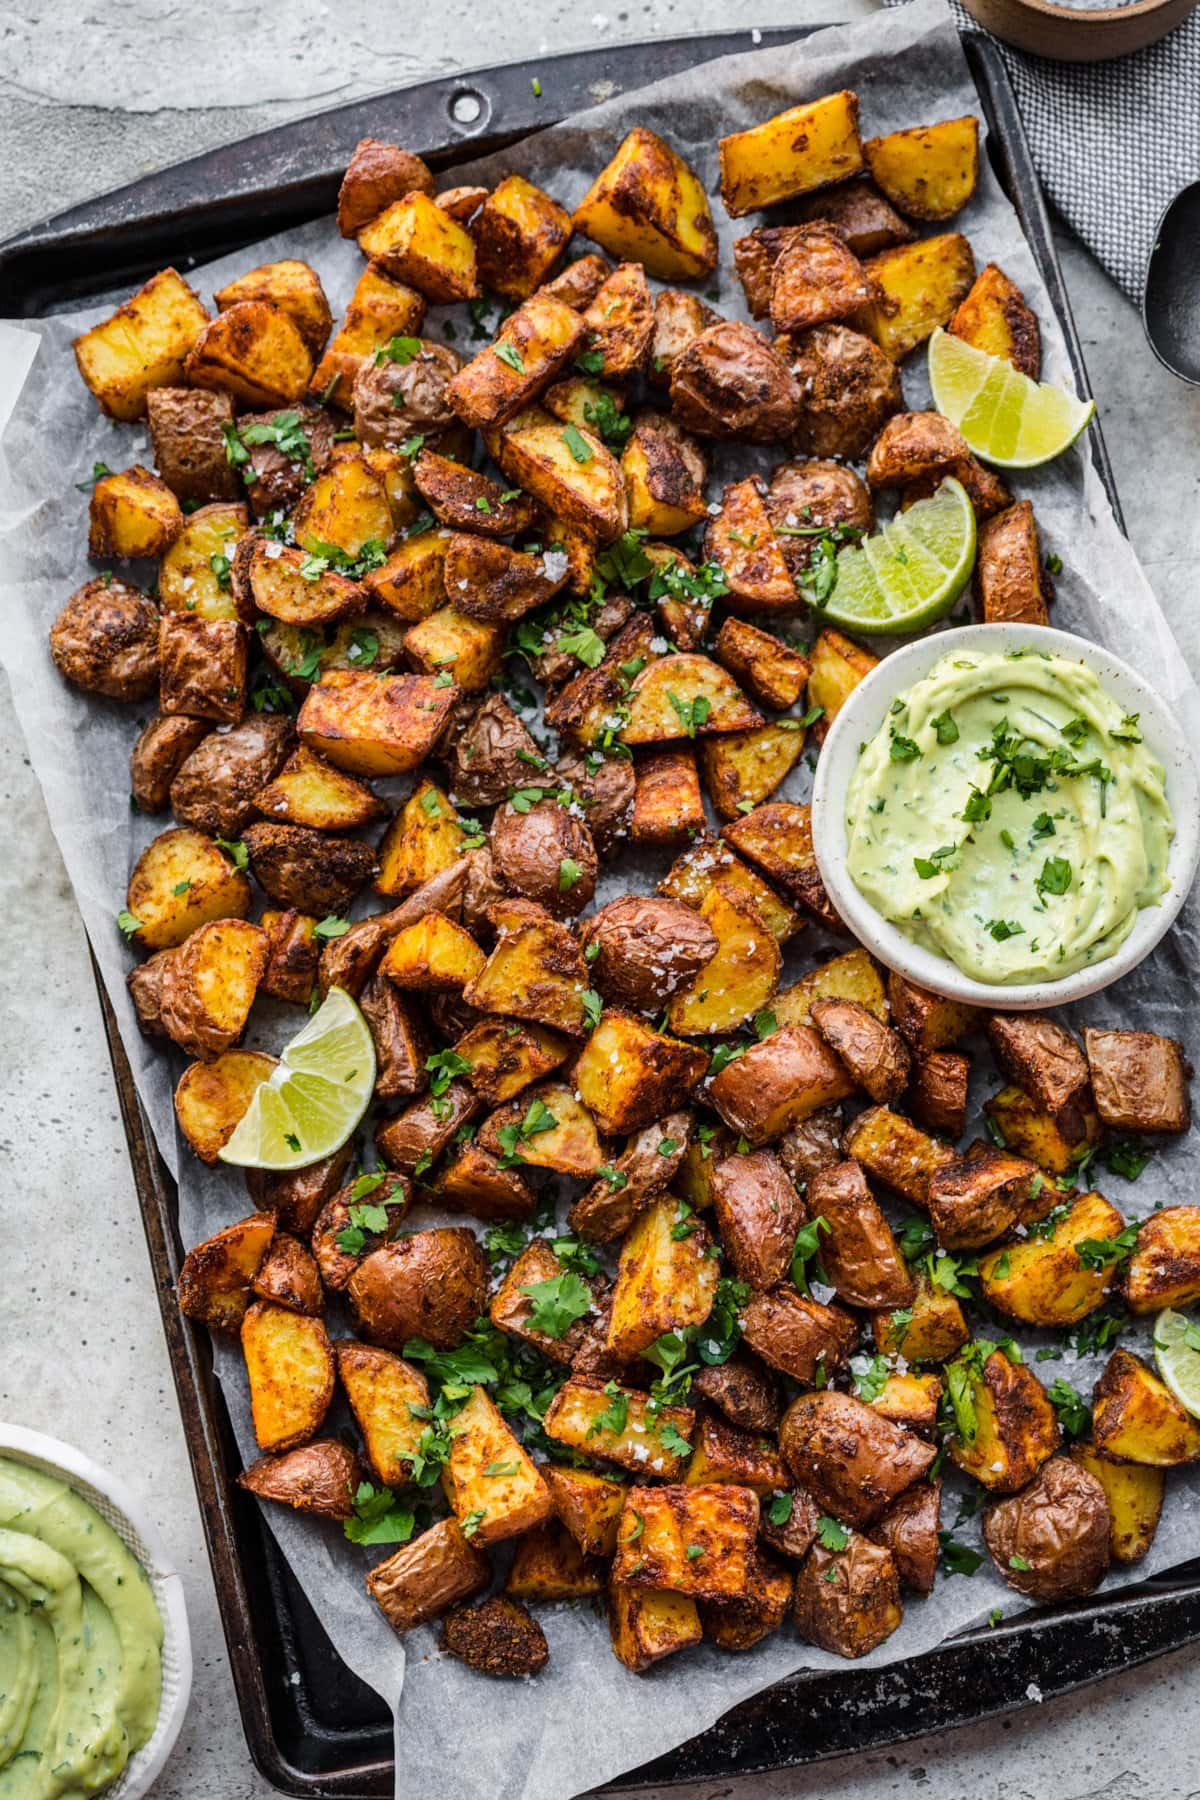 Overhead view of roasted mexican potatoes on a tray with an avocado crema.